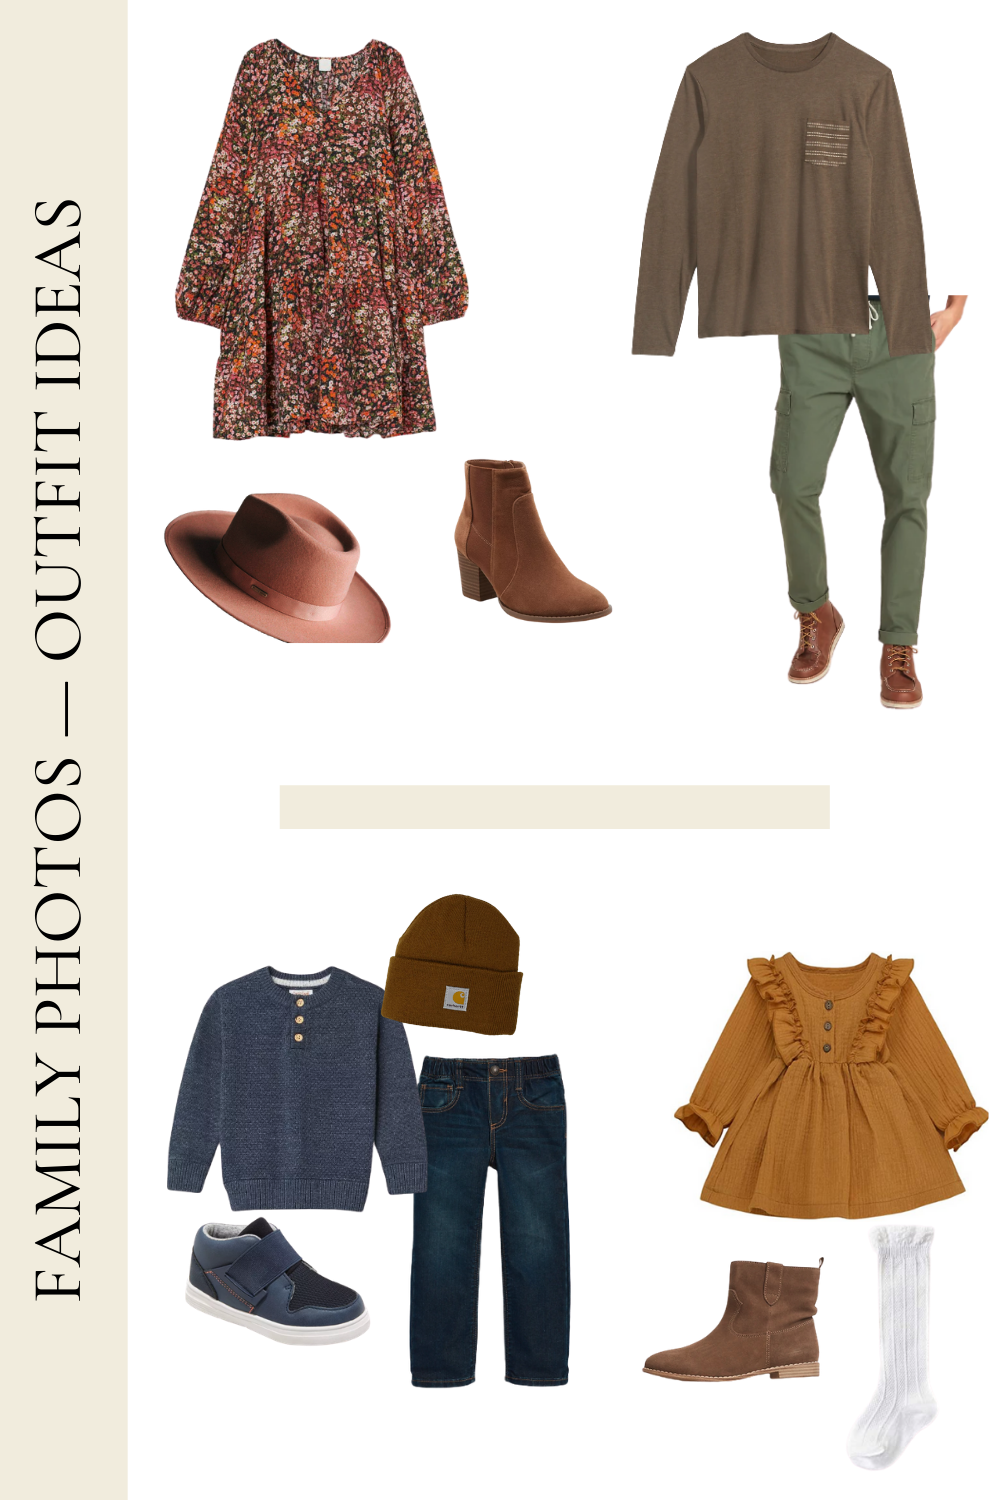 Fall Family Photo Outfit Ideas For Your Entire Family by Alabama Family + Lifestyle blogger, Heather Brown // My Life Well Loved